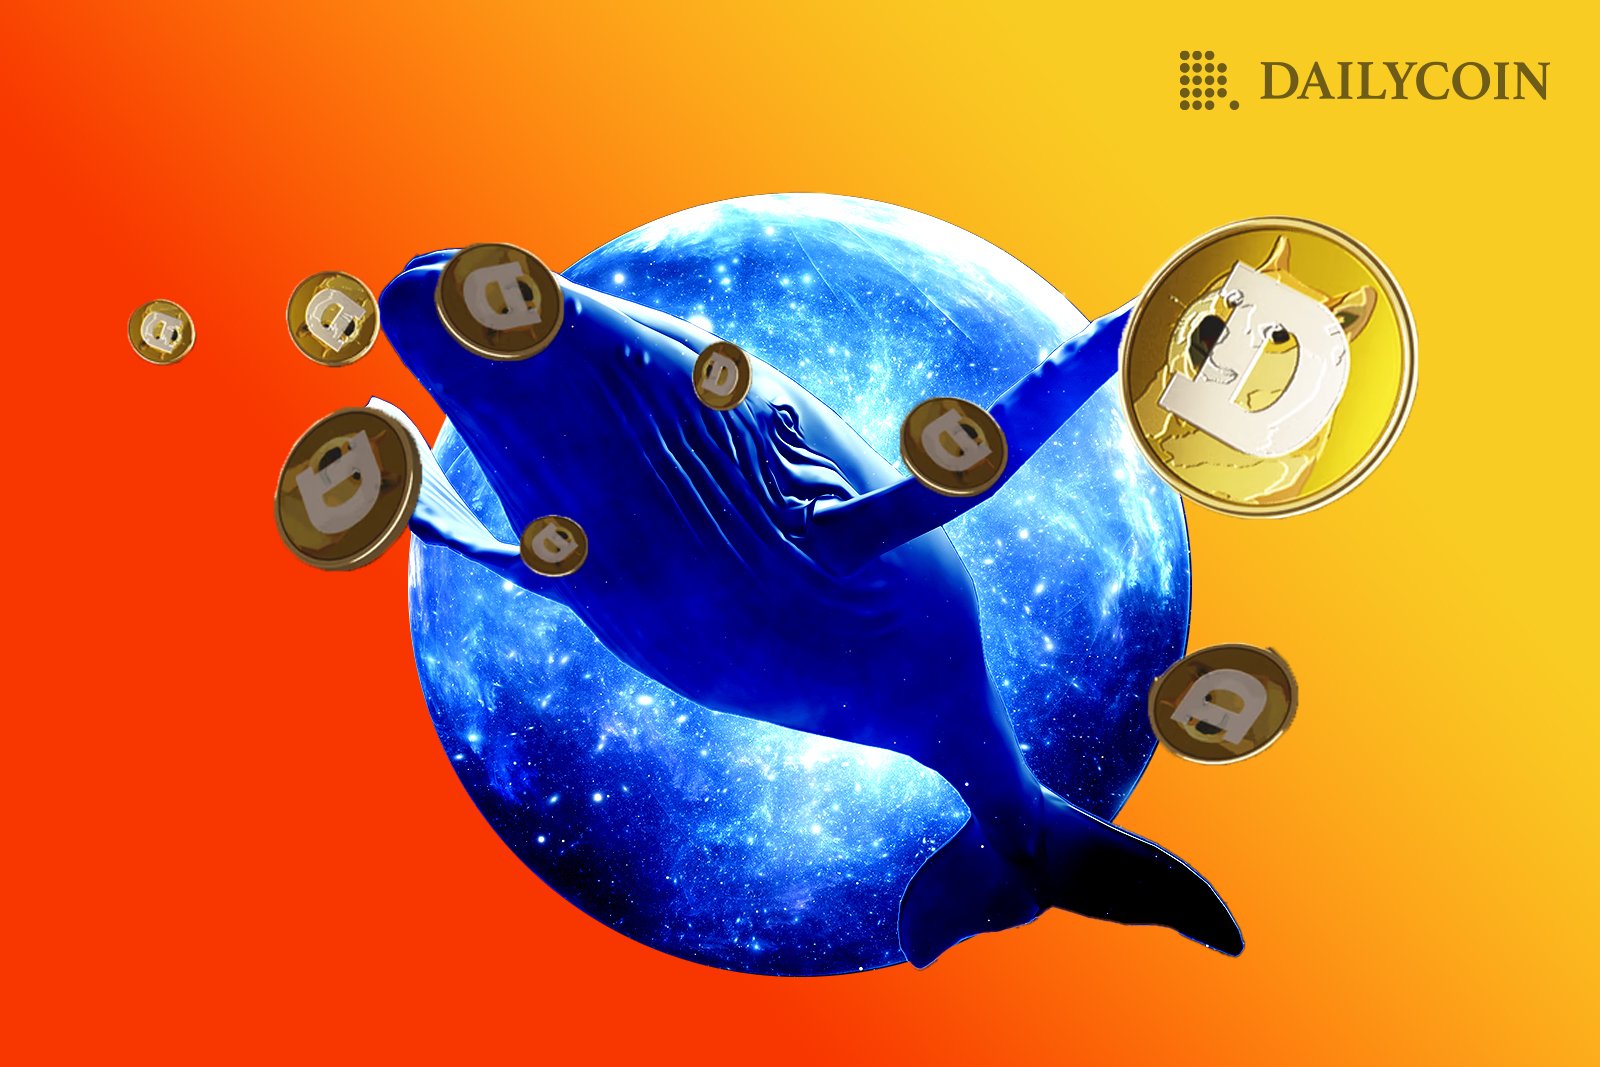 A blue whale flies in front of the earth surrounded by Doge coins